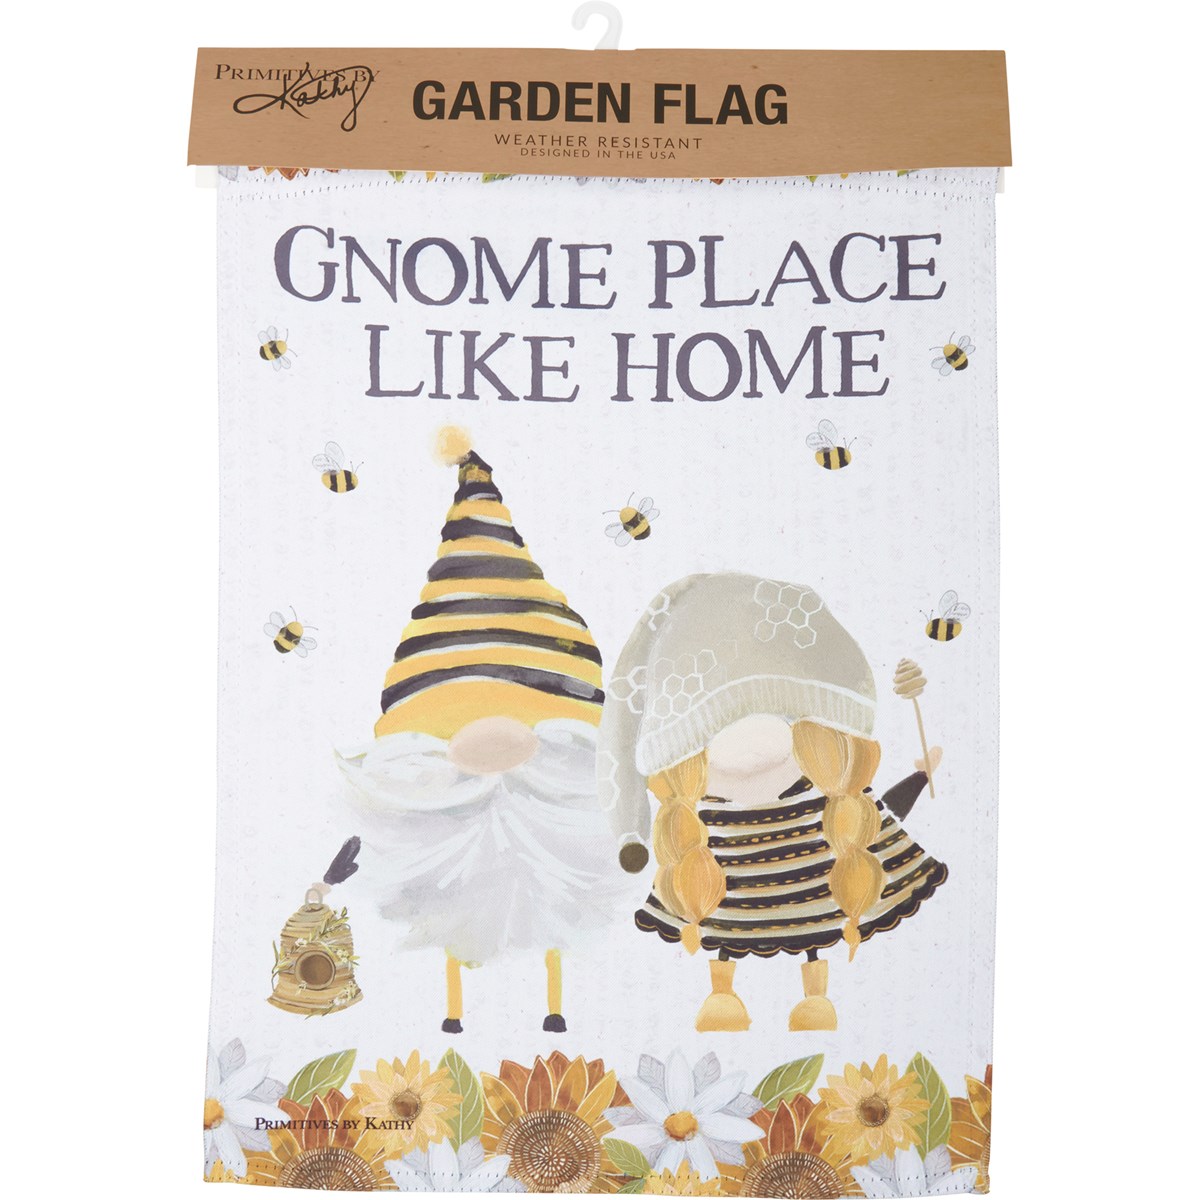 Gnome Place Like Home Garden Flag - Polyester